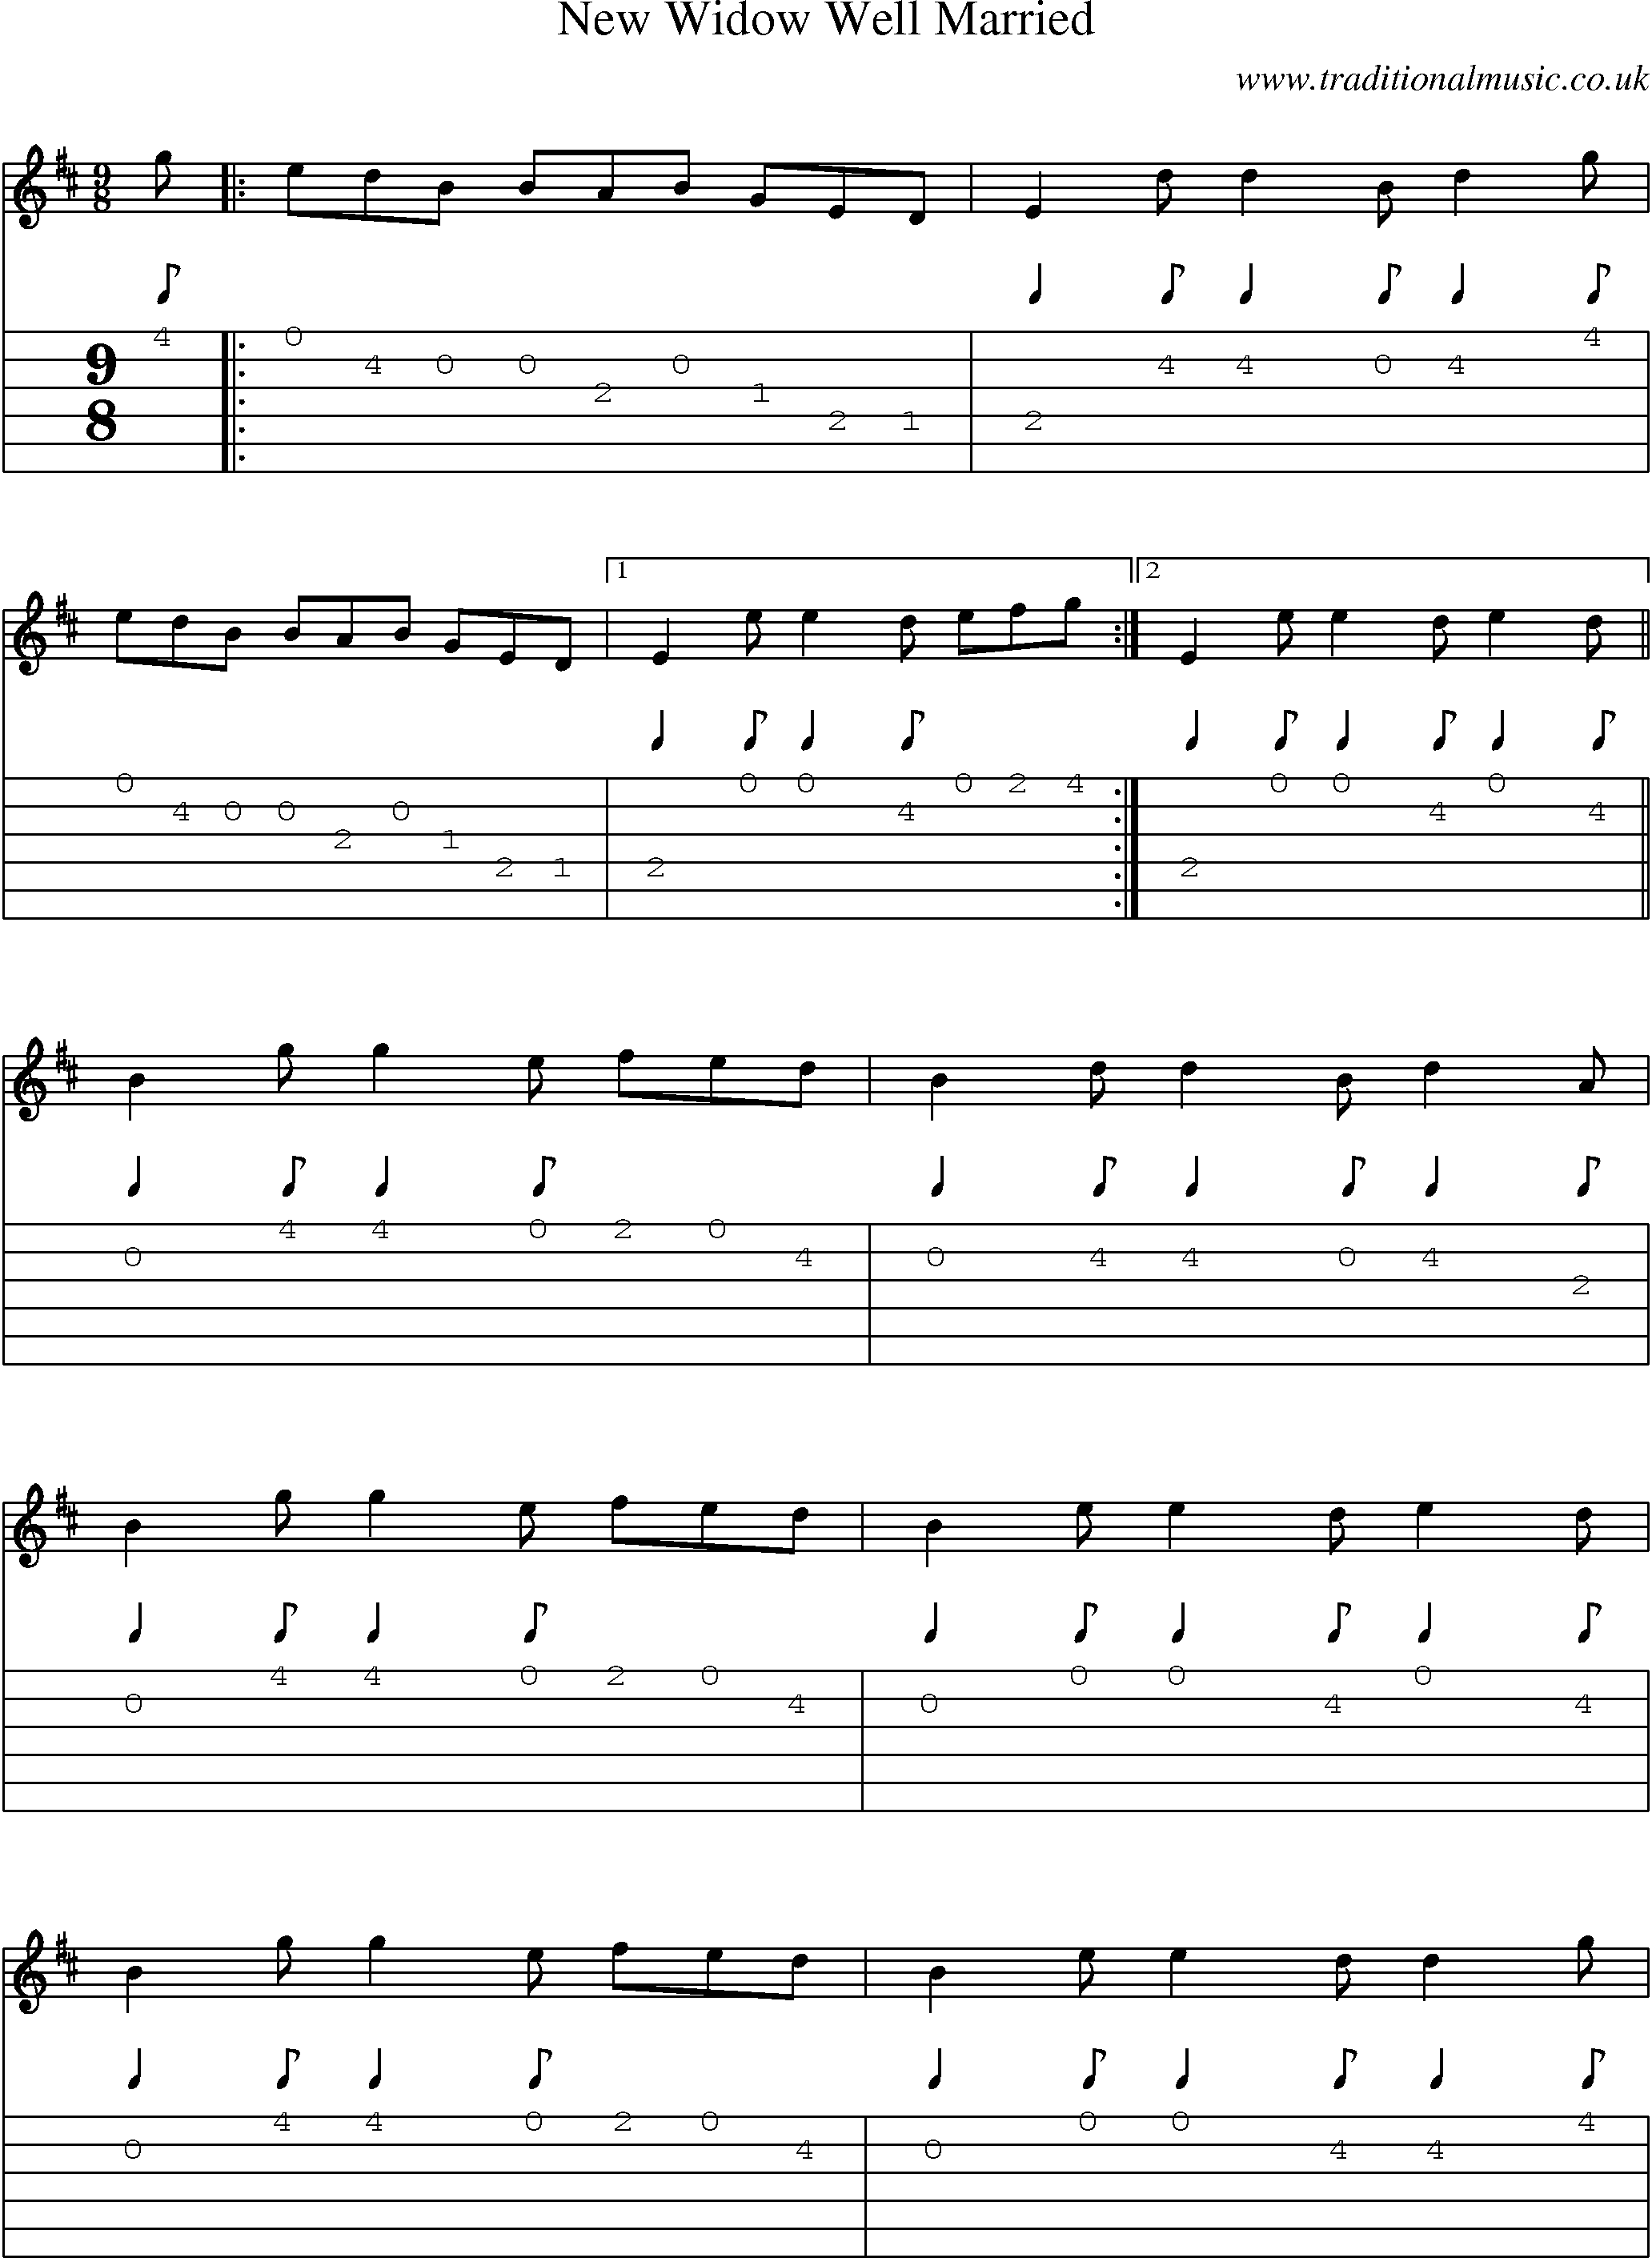 Music Score and Guitar Tabs for New Widow Well Married